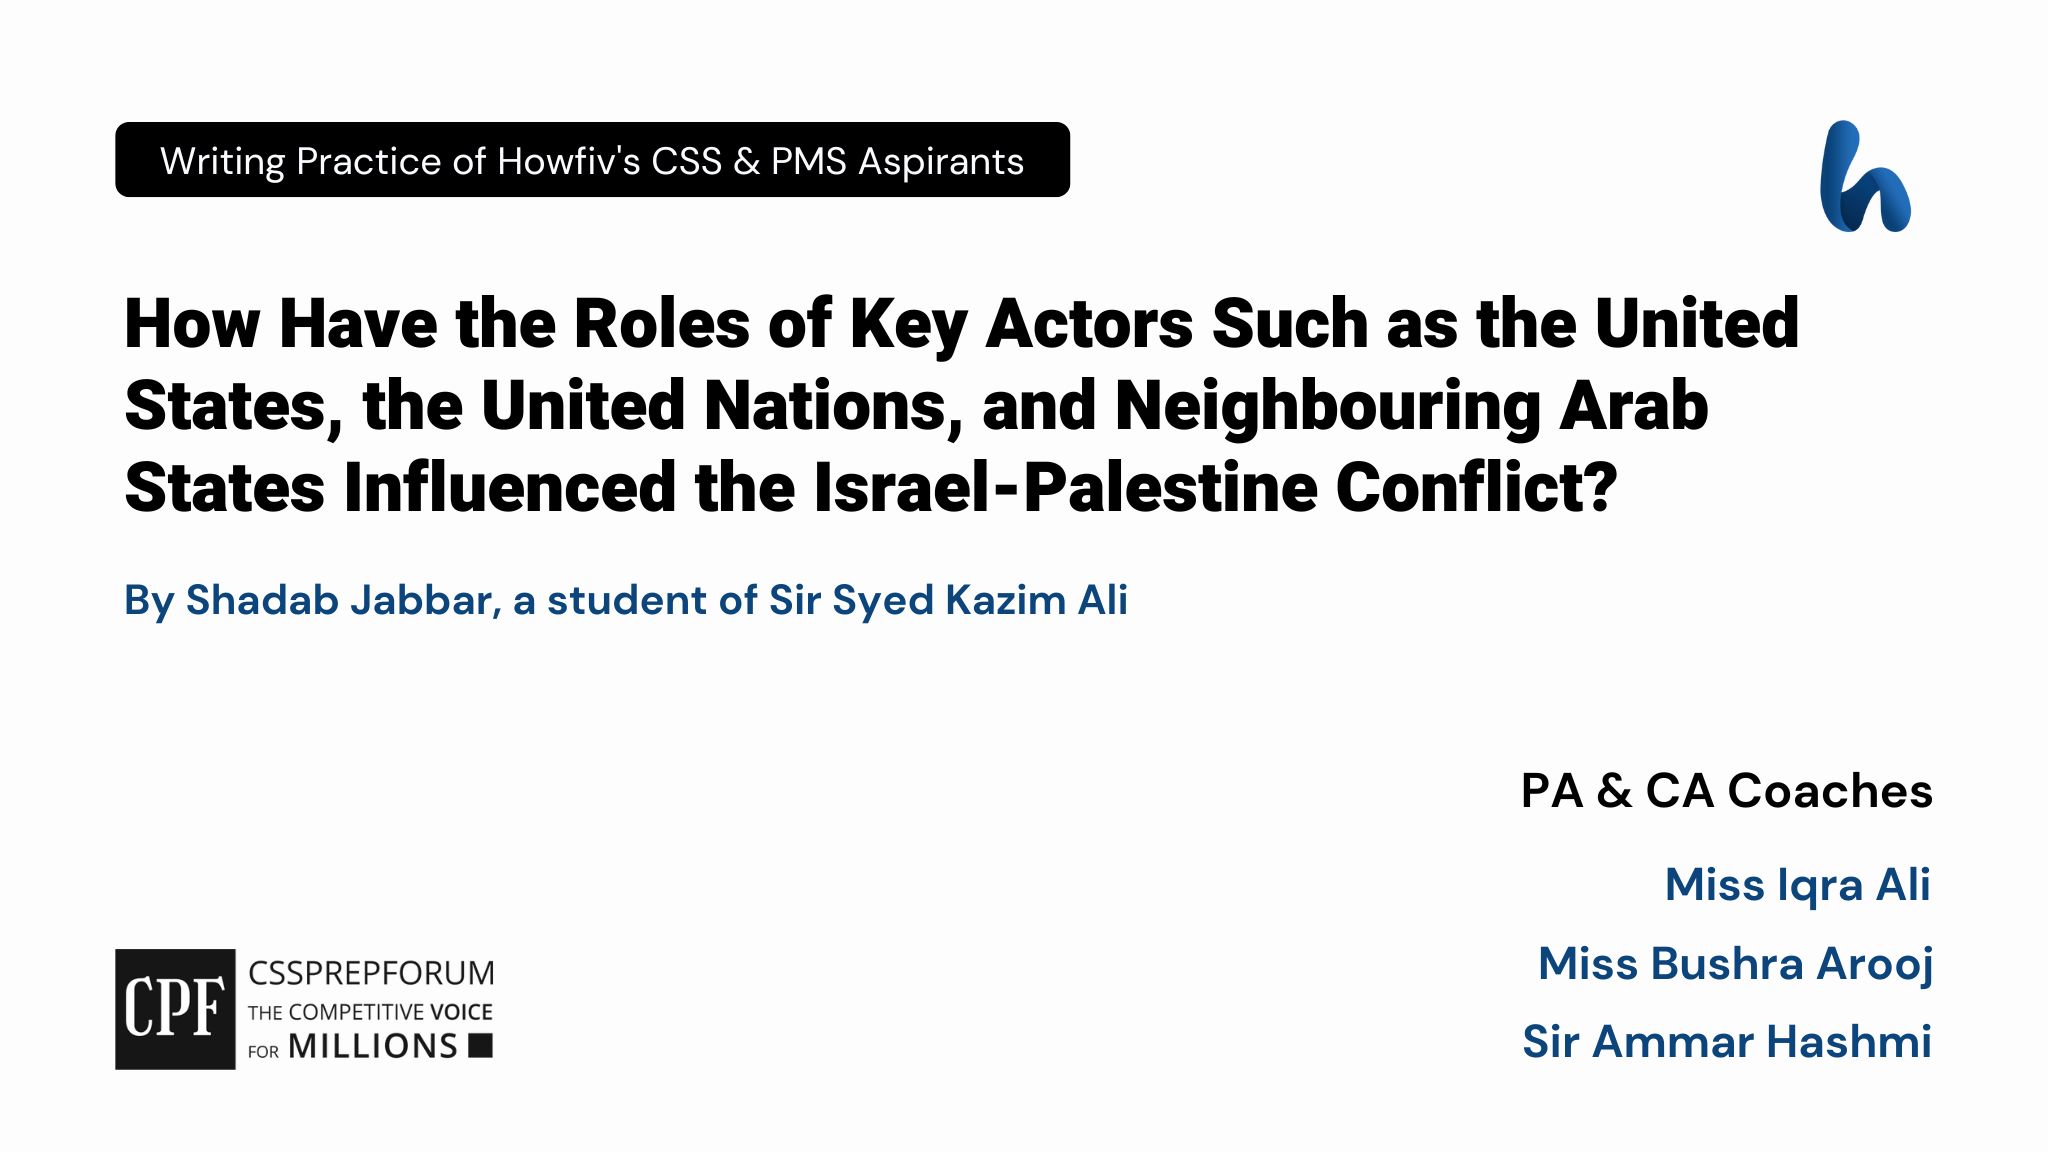 CSS Current Affairs | Role of the United States, United Nations, and Neighbouring Arab States in the Israel-Palestine Conflict | is written by Shadab Jabbar under the Supervision of Sir Ammar Hashmi...